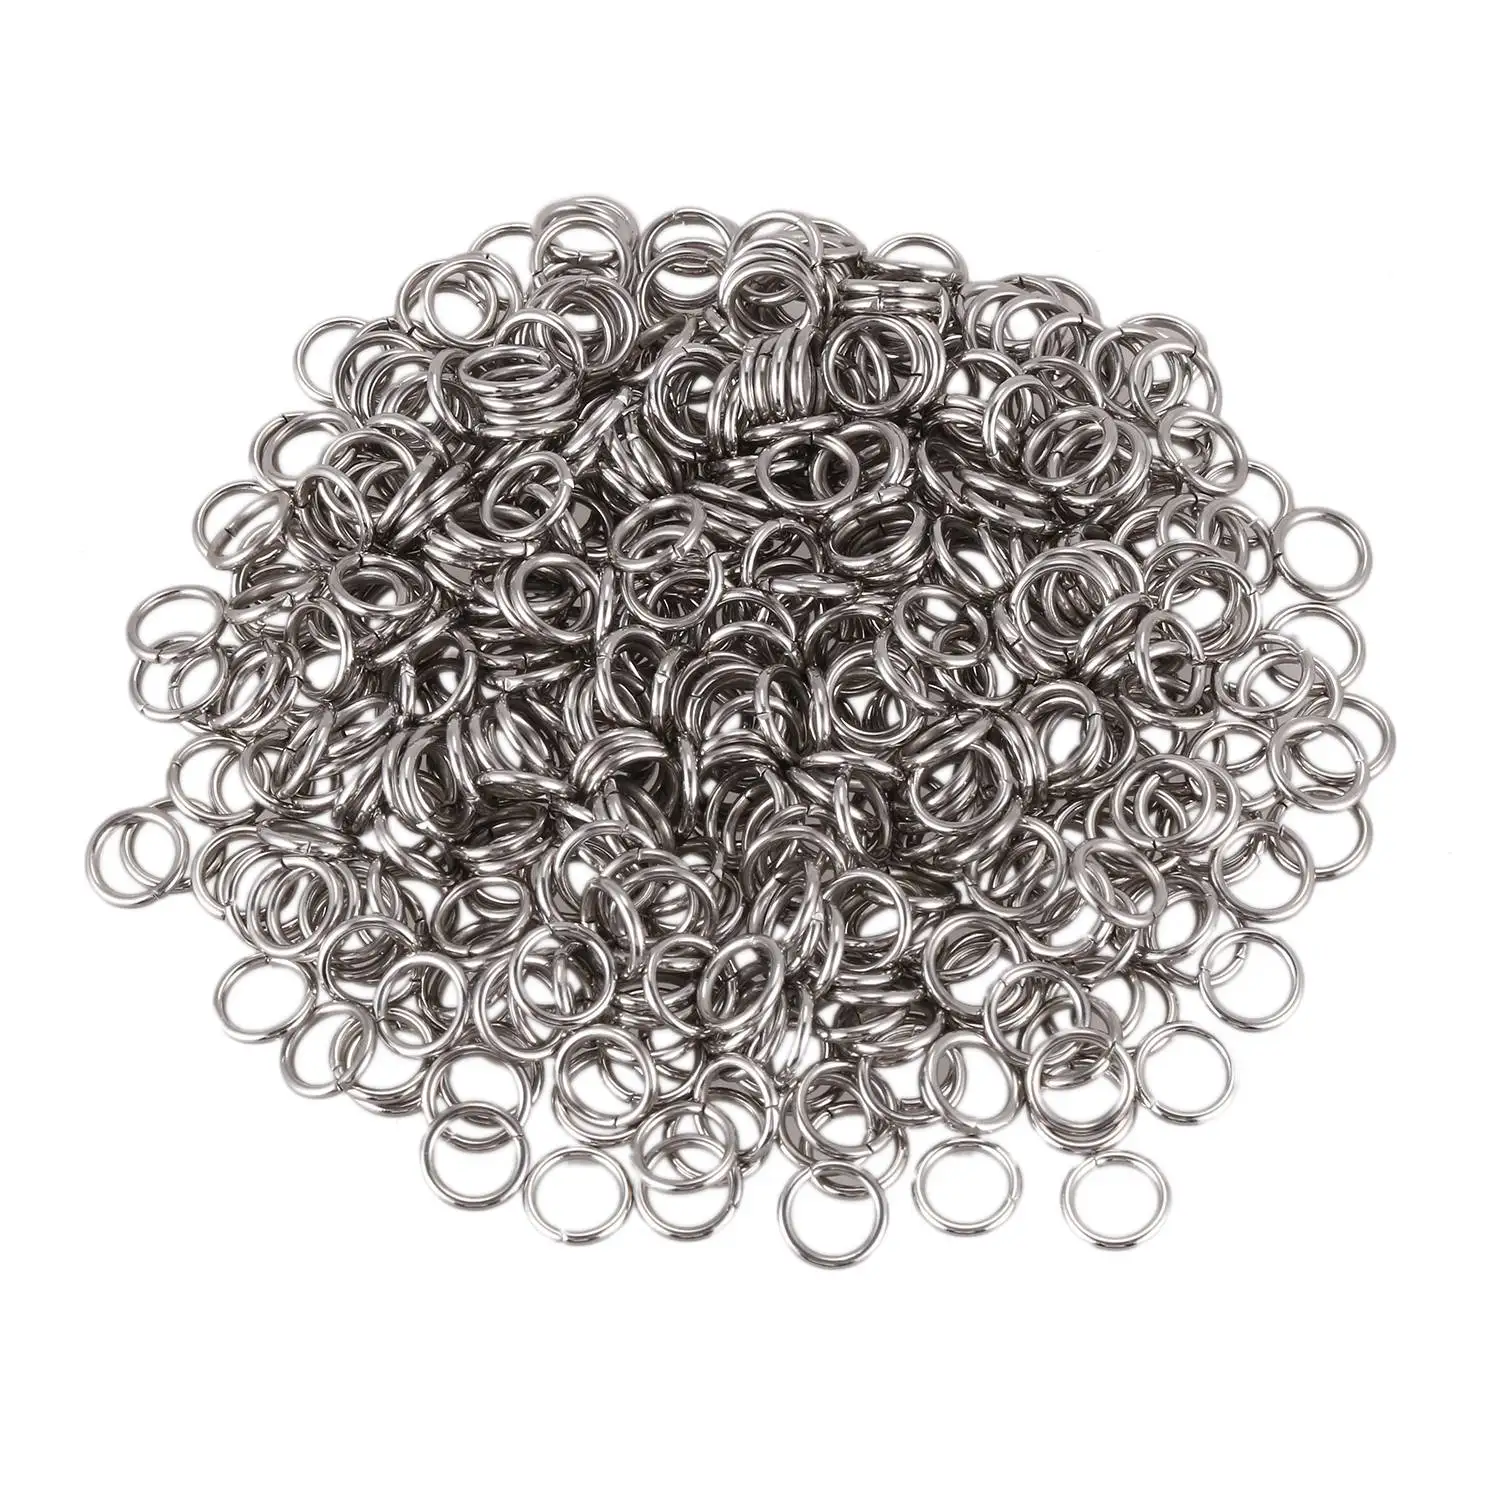 

500 Stainless Steel Open Jump Rings 7mm Dia. Findings